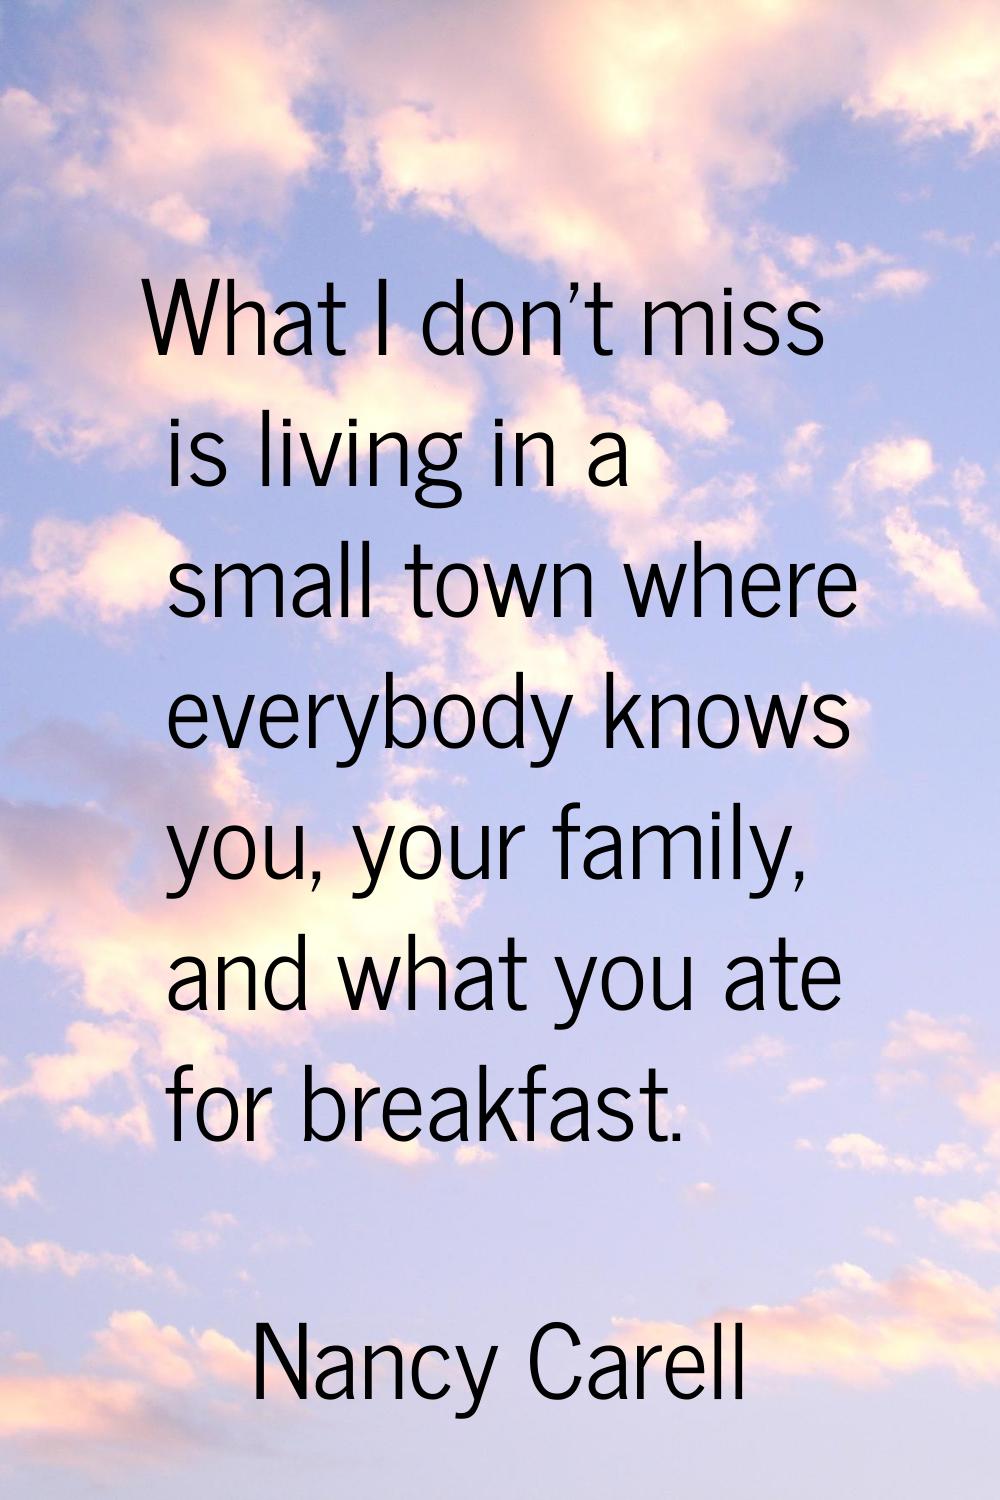 What I don't miss is living in a small town where everybody knows you, your family, and what you at